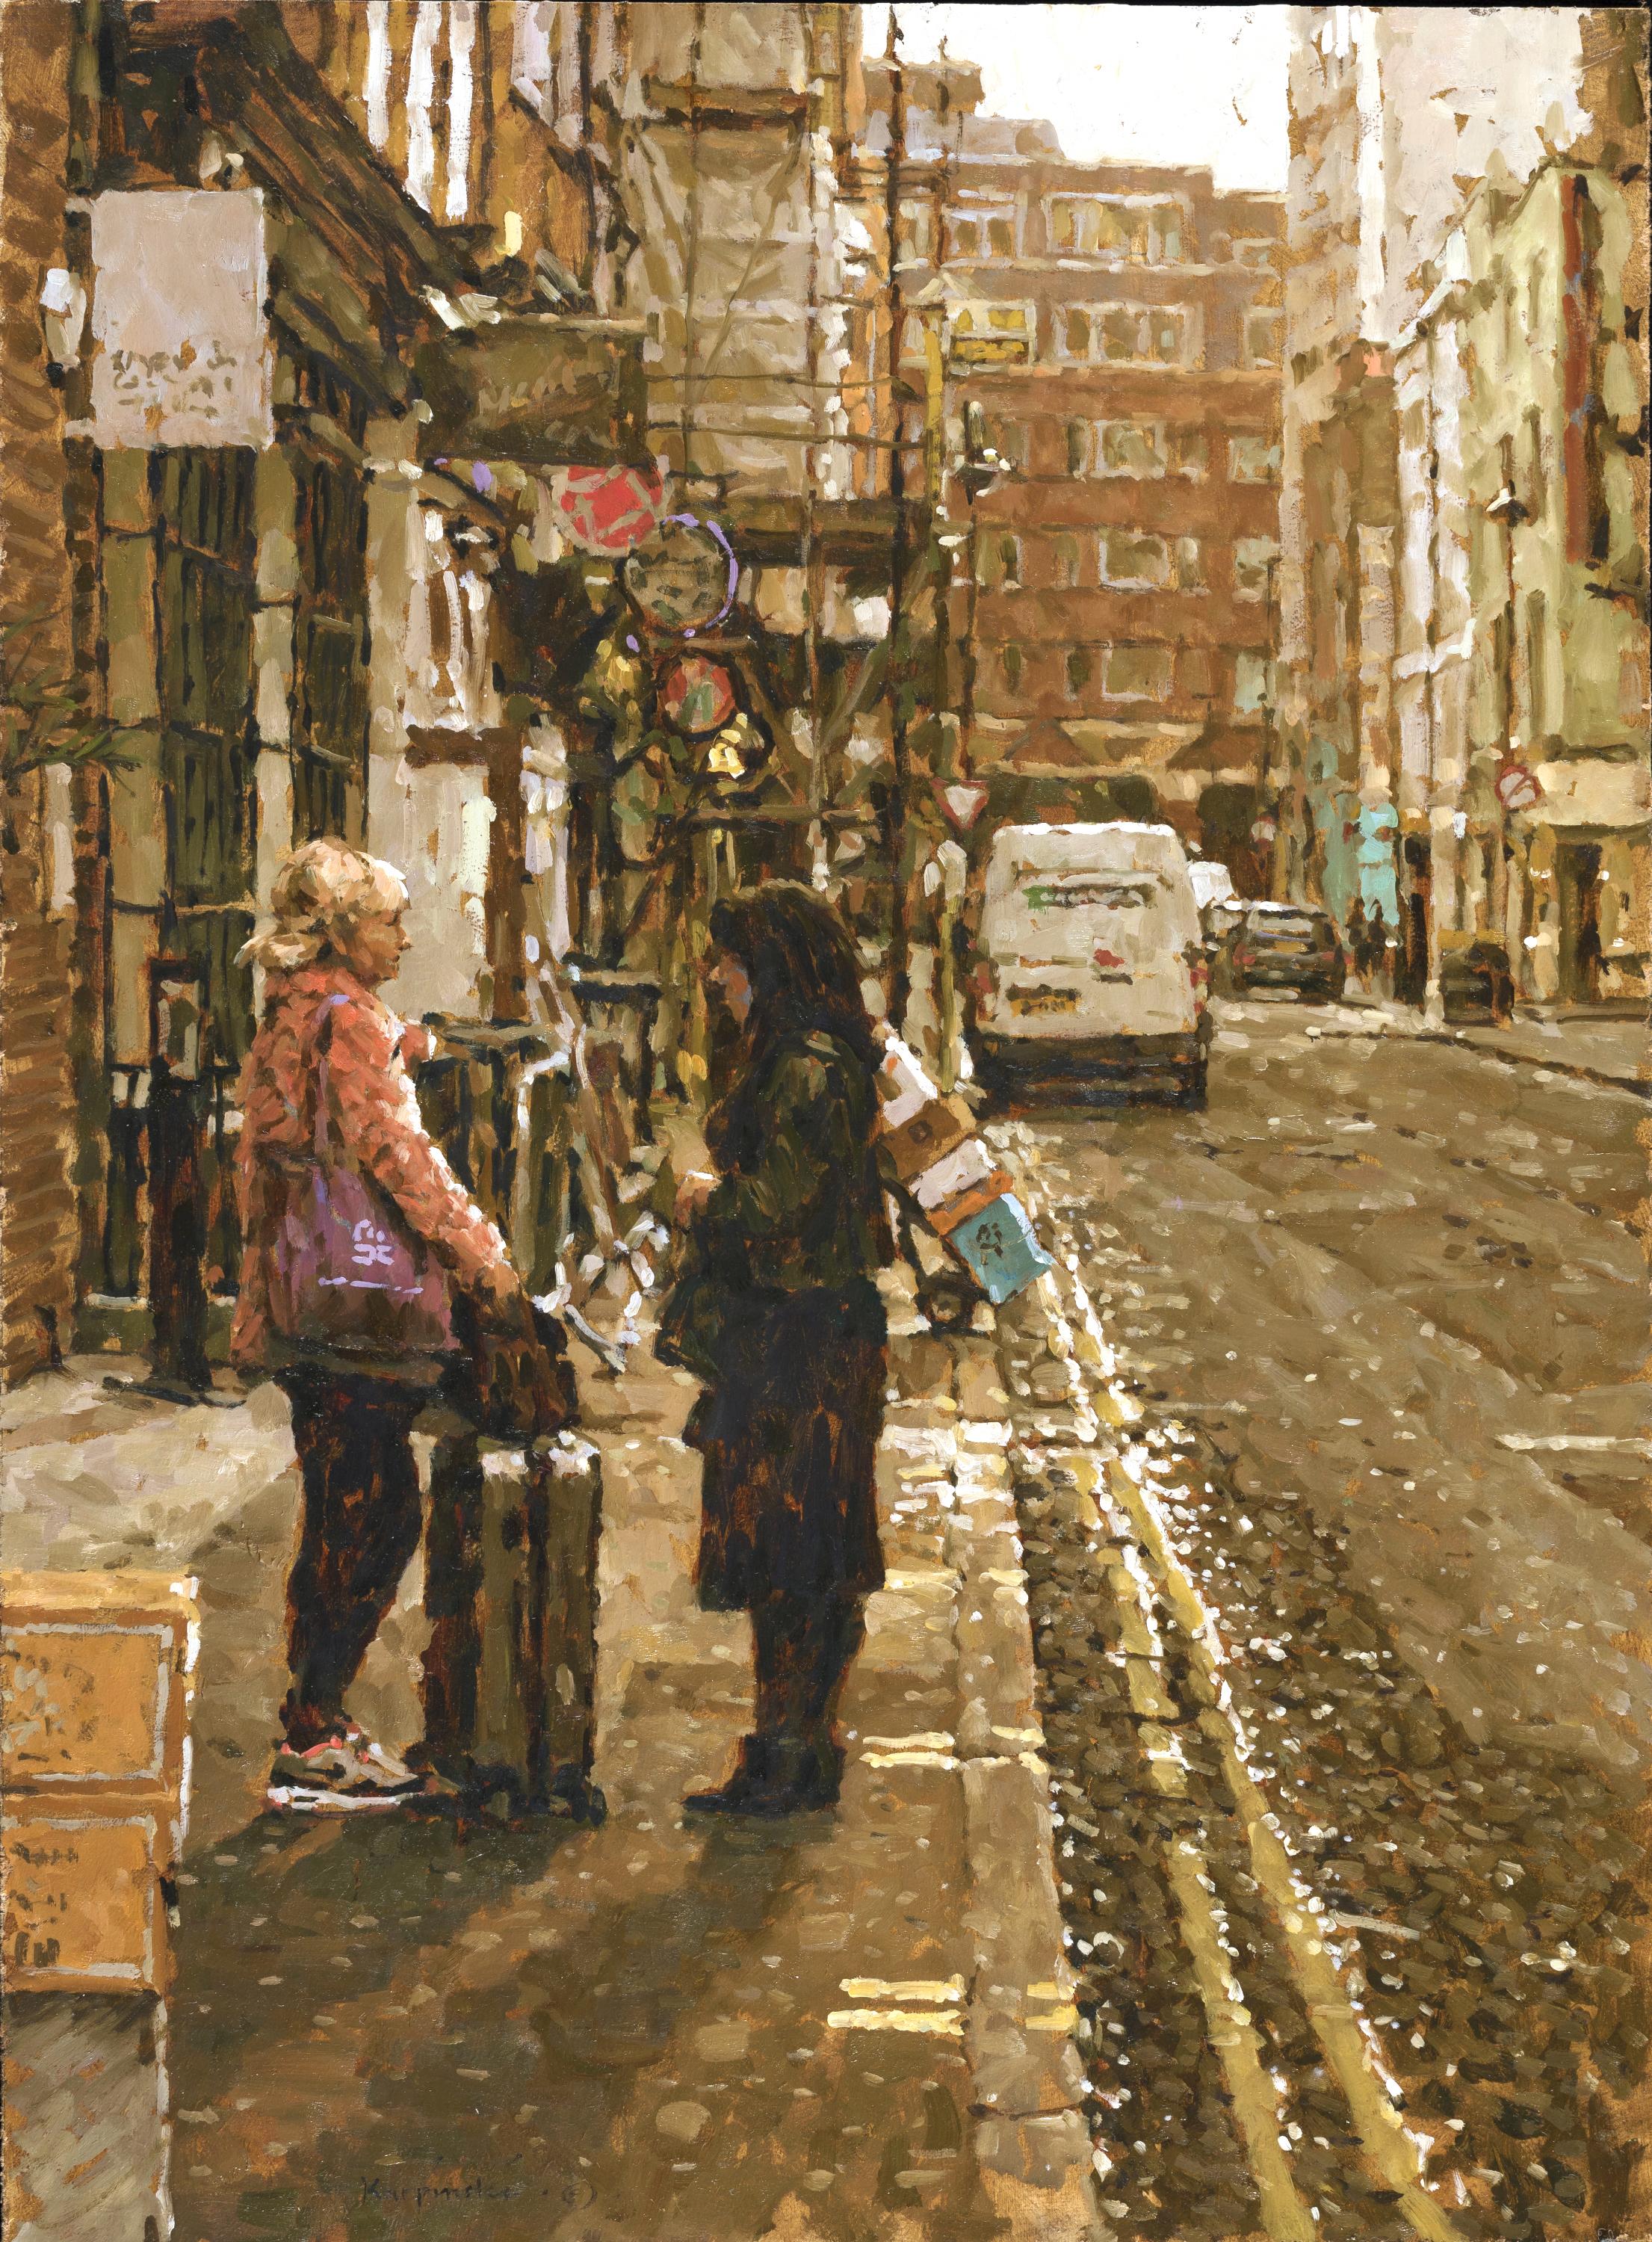 Farewells or Welcomes - Painting by Tony Karpinski